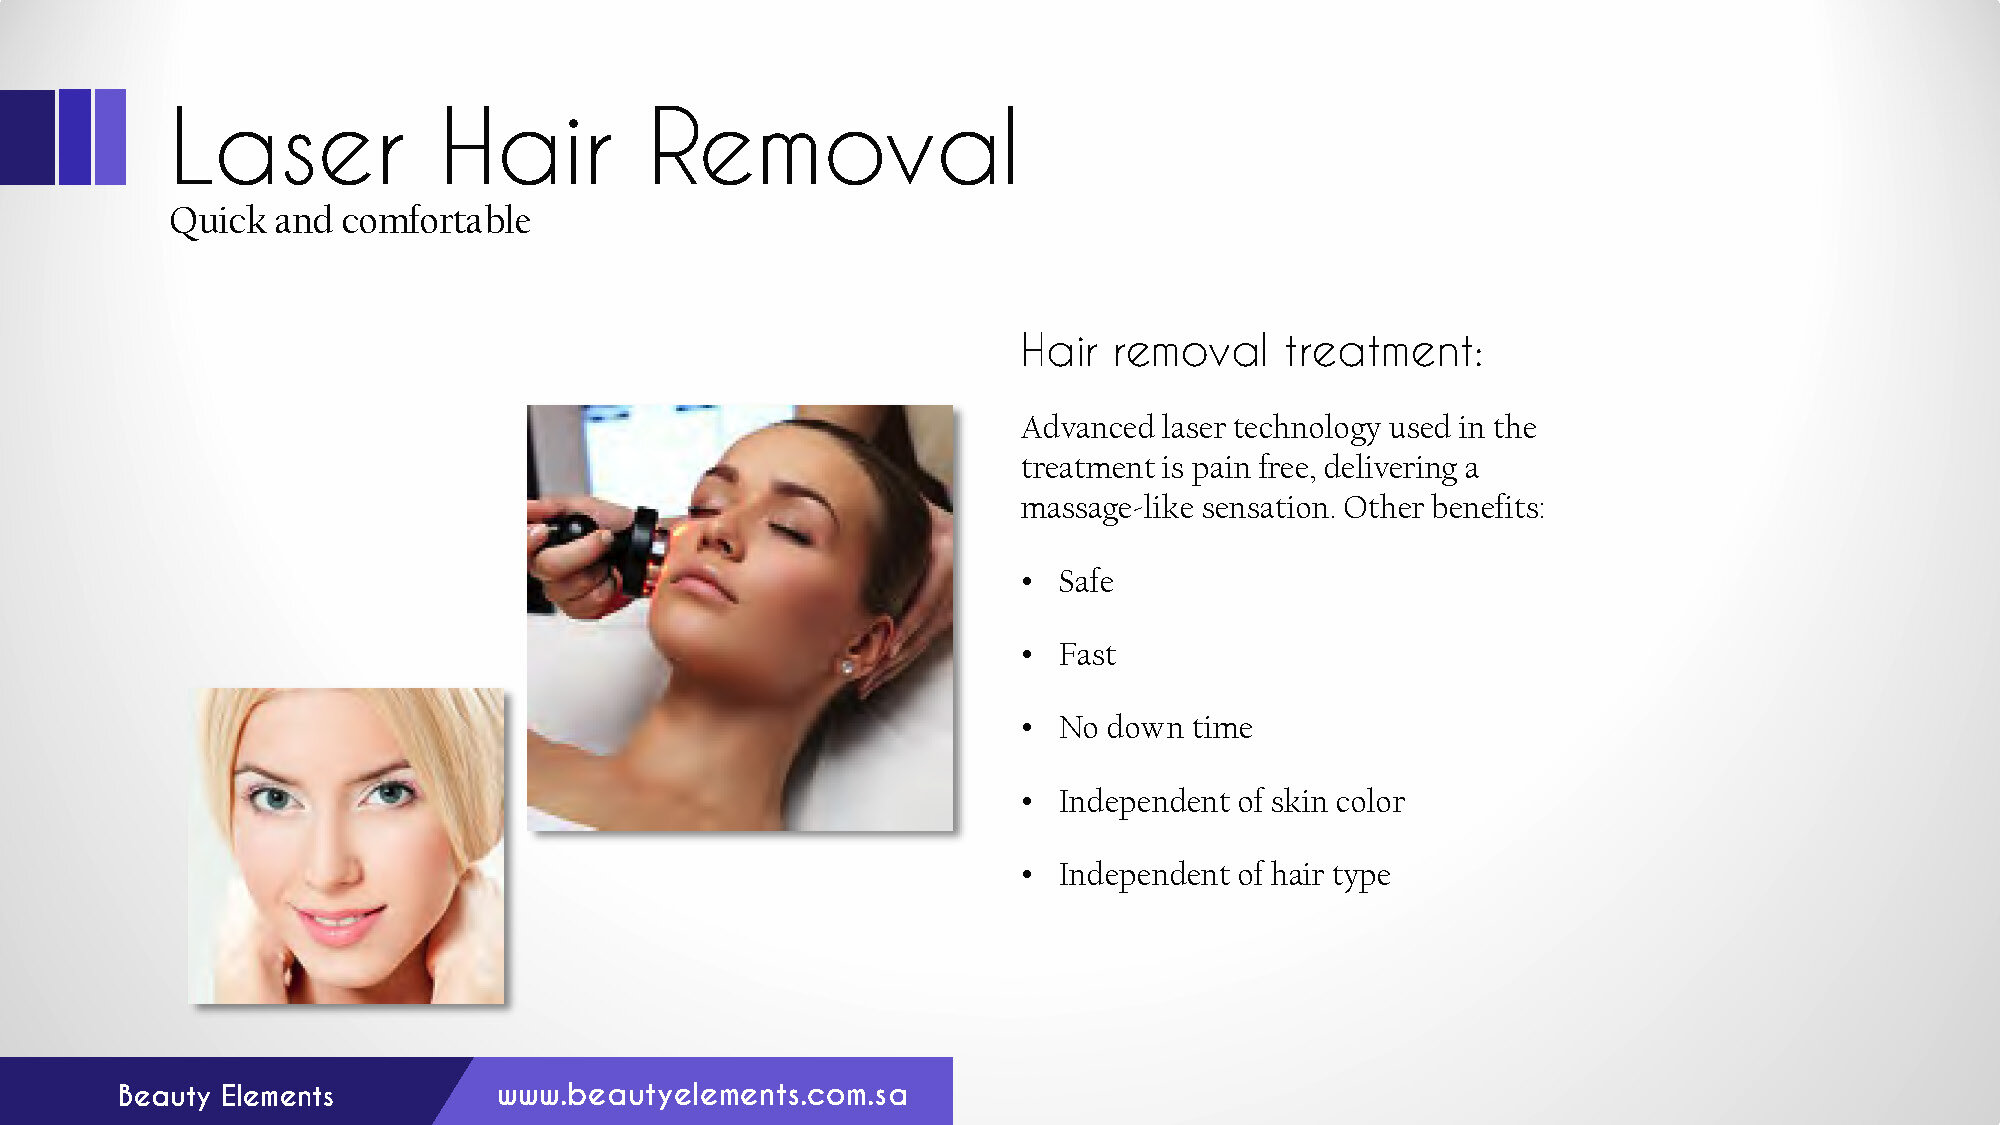 Laser Hair Removal Comfort